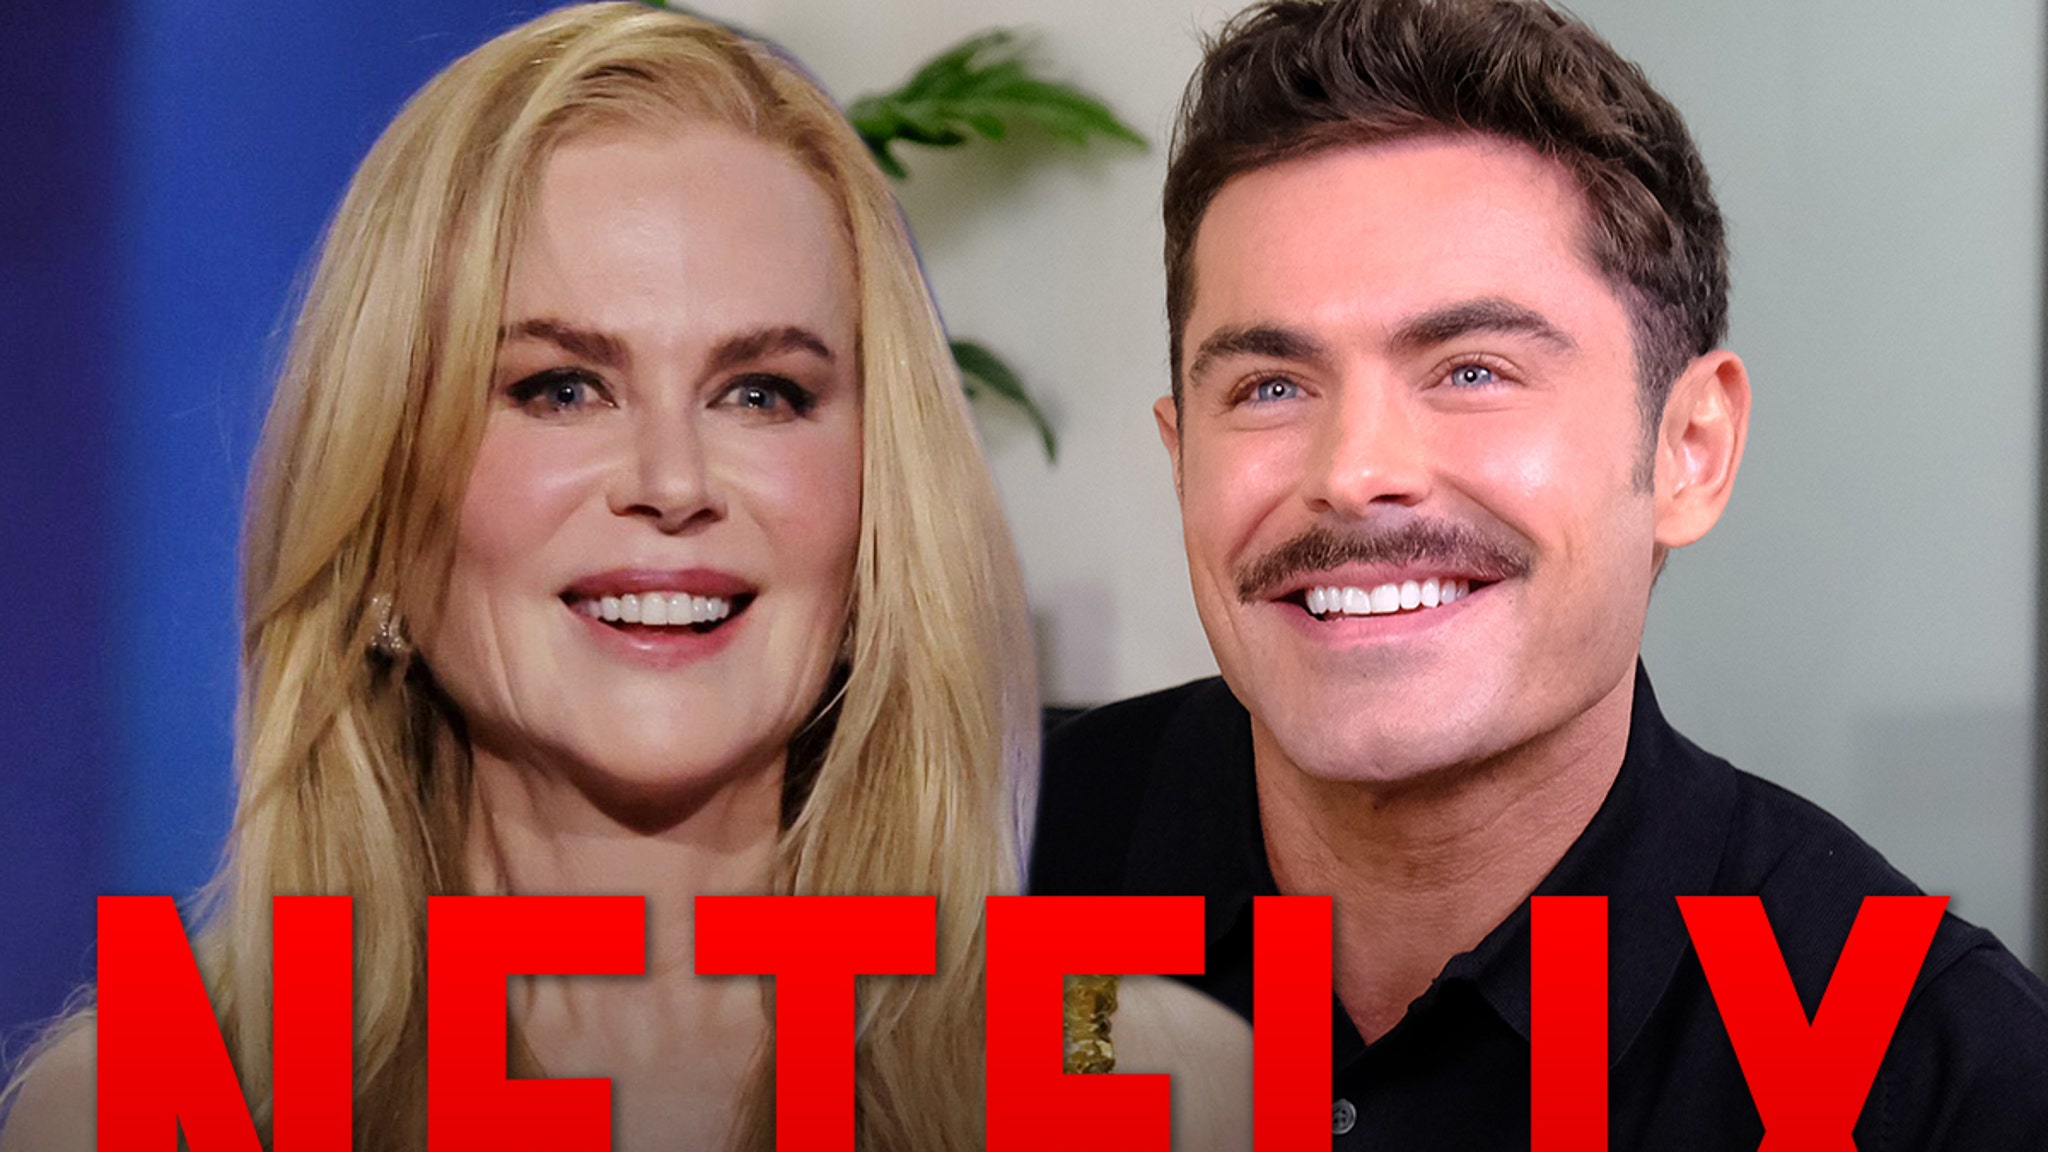 Nicole Kidman Gets in The Sack With Zac Efron In Movie Trailer